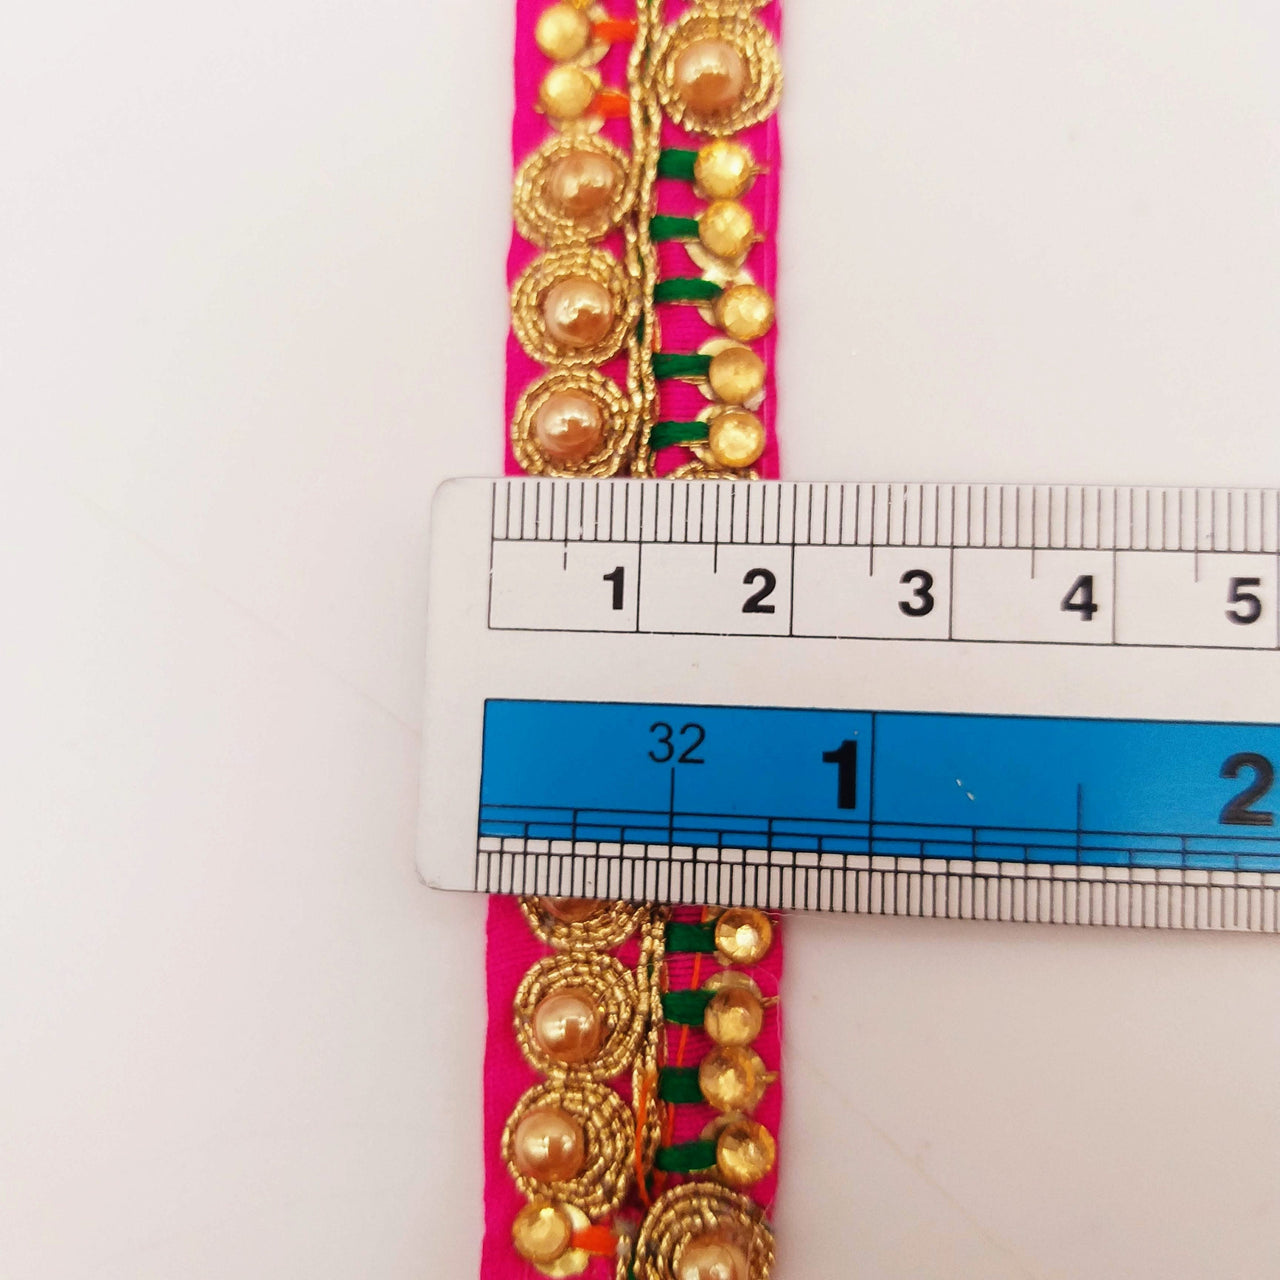 Fuchsia Pink Fabric Embroidered Trim with Gold Beads, Decorative Sari Trim, Trim By 3 Yards